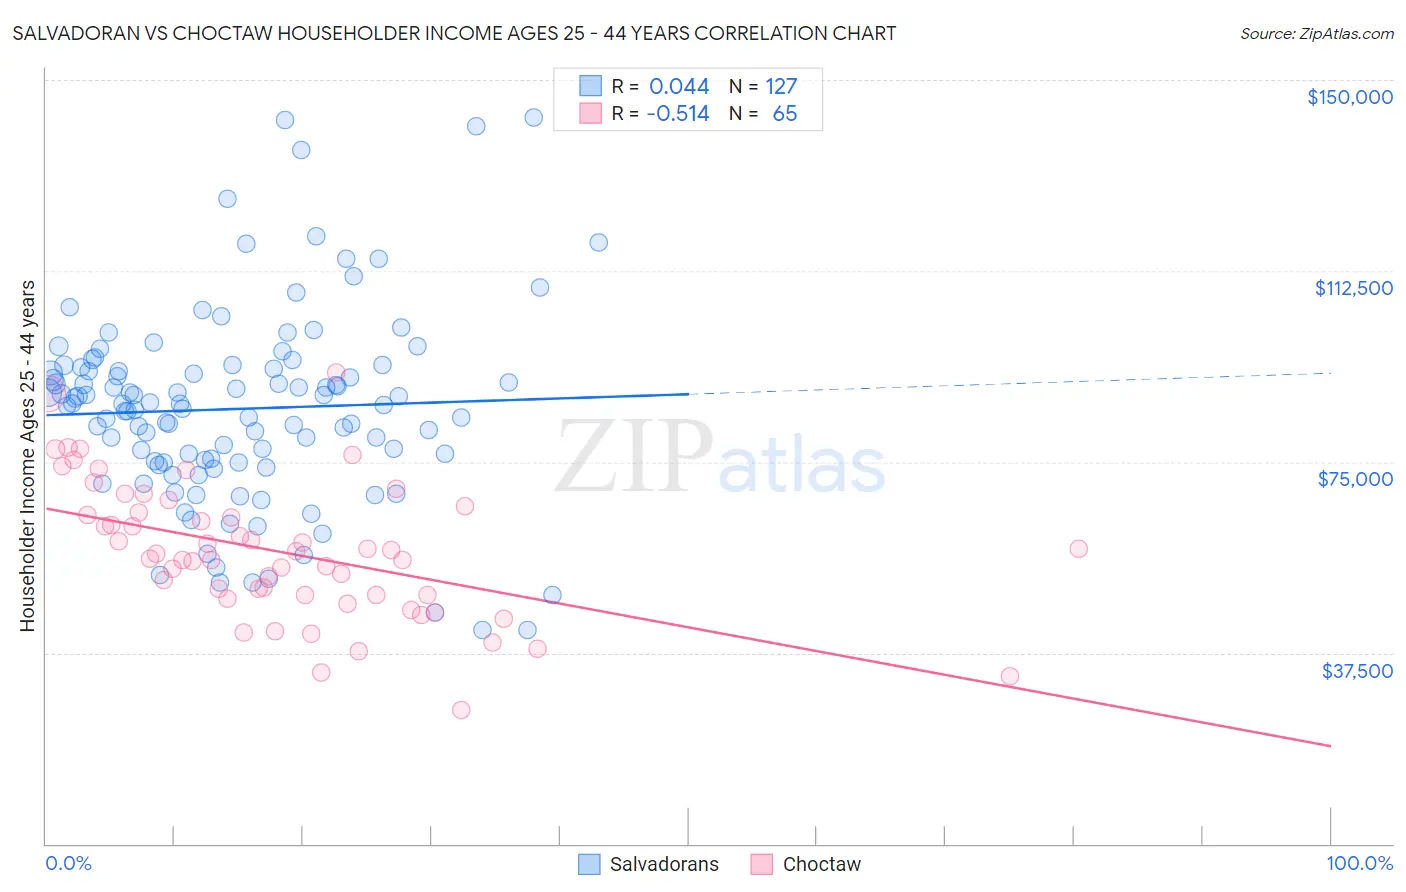 Salvadoran vs Choctaw Householder Income Ages 25 - 44 years